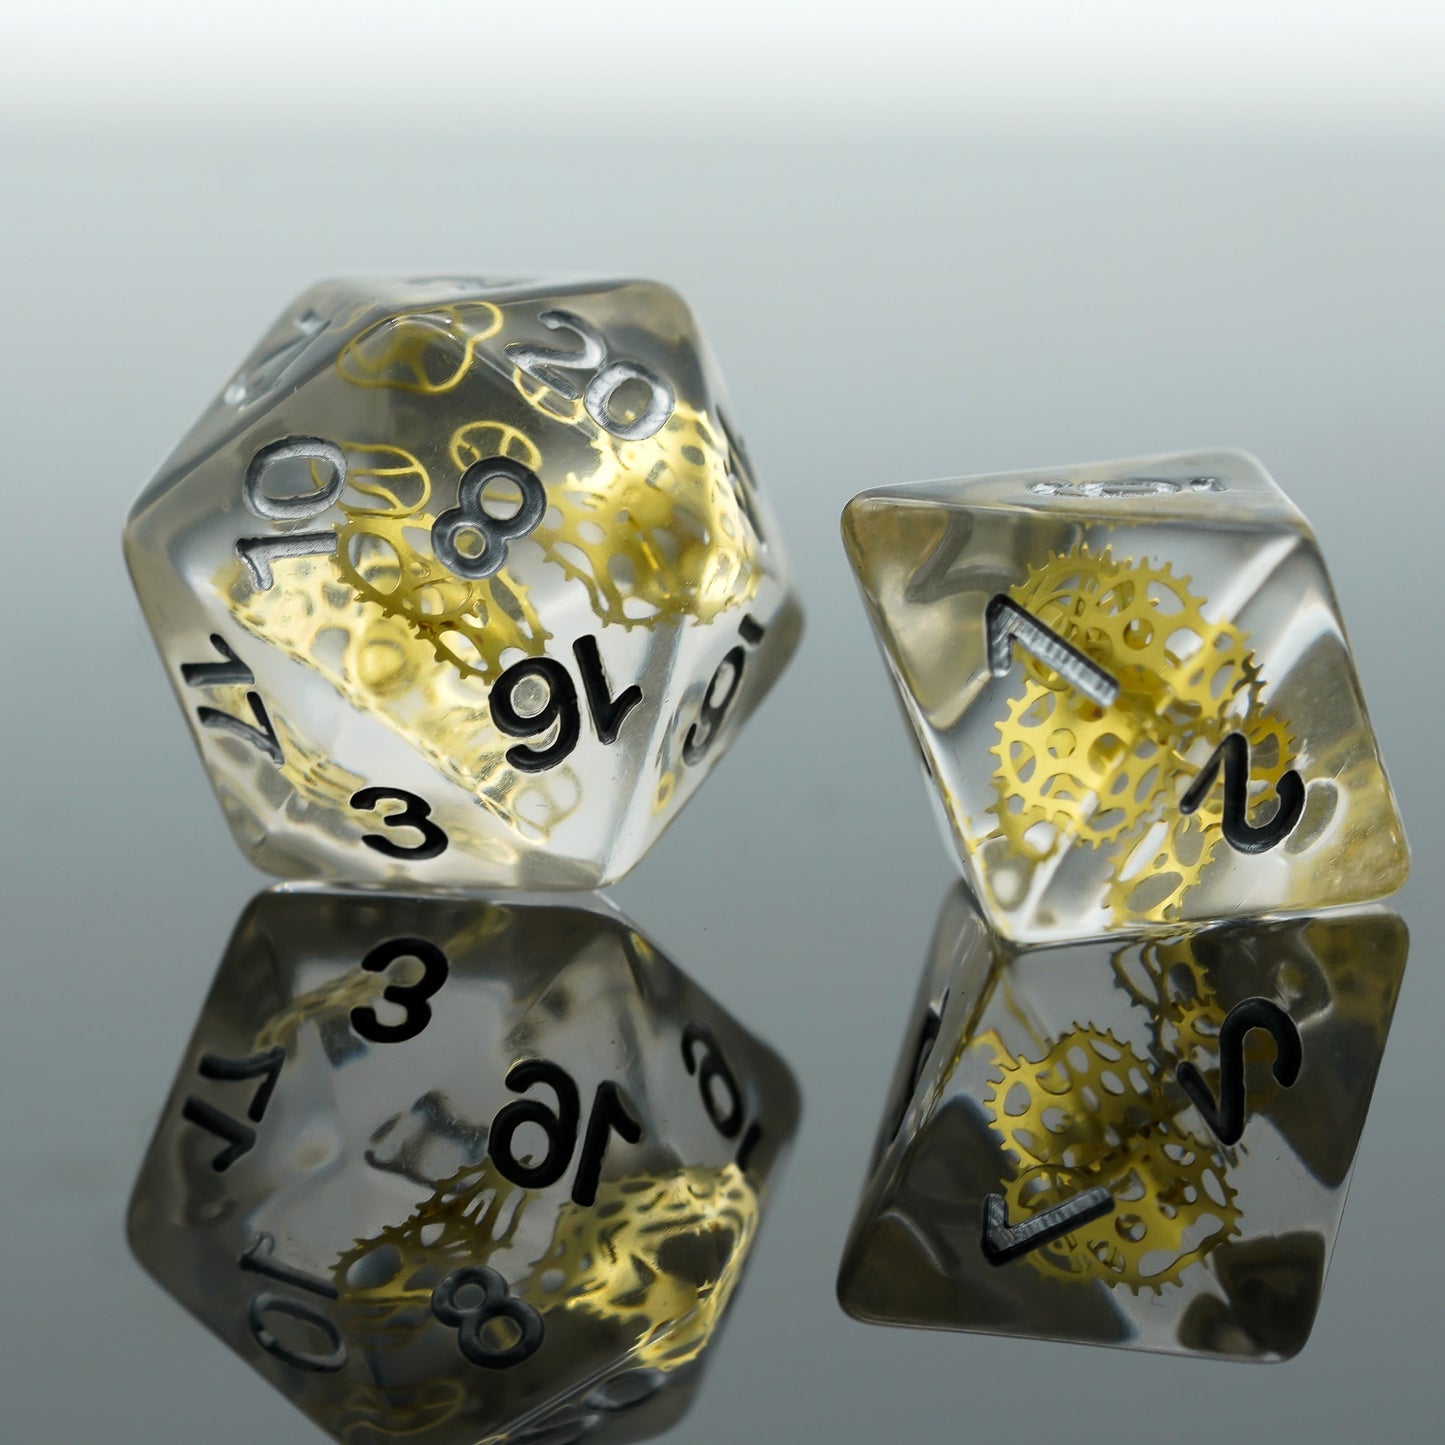 d20 and d8 highlight, gold gears and dark numbers android gears dice 